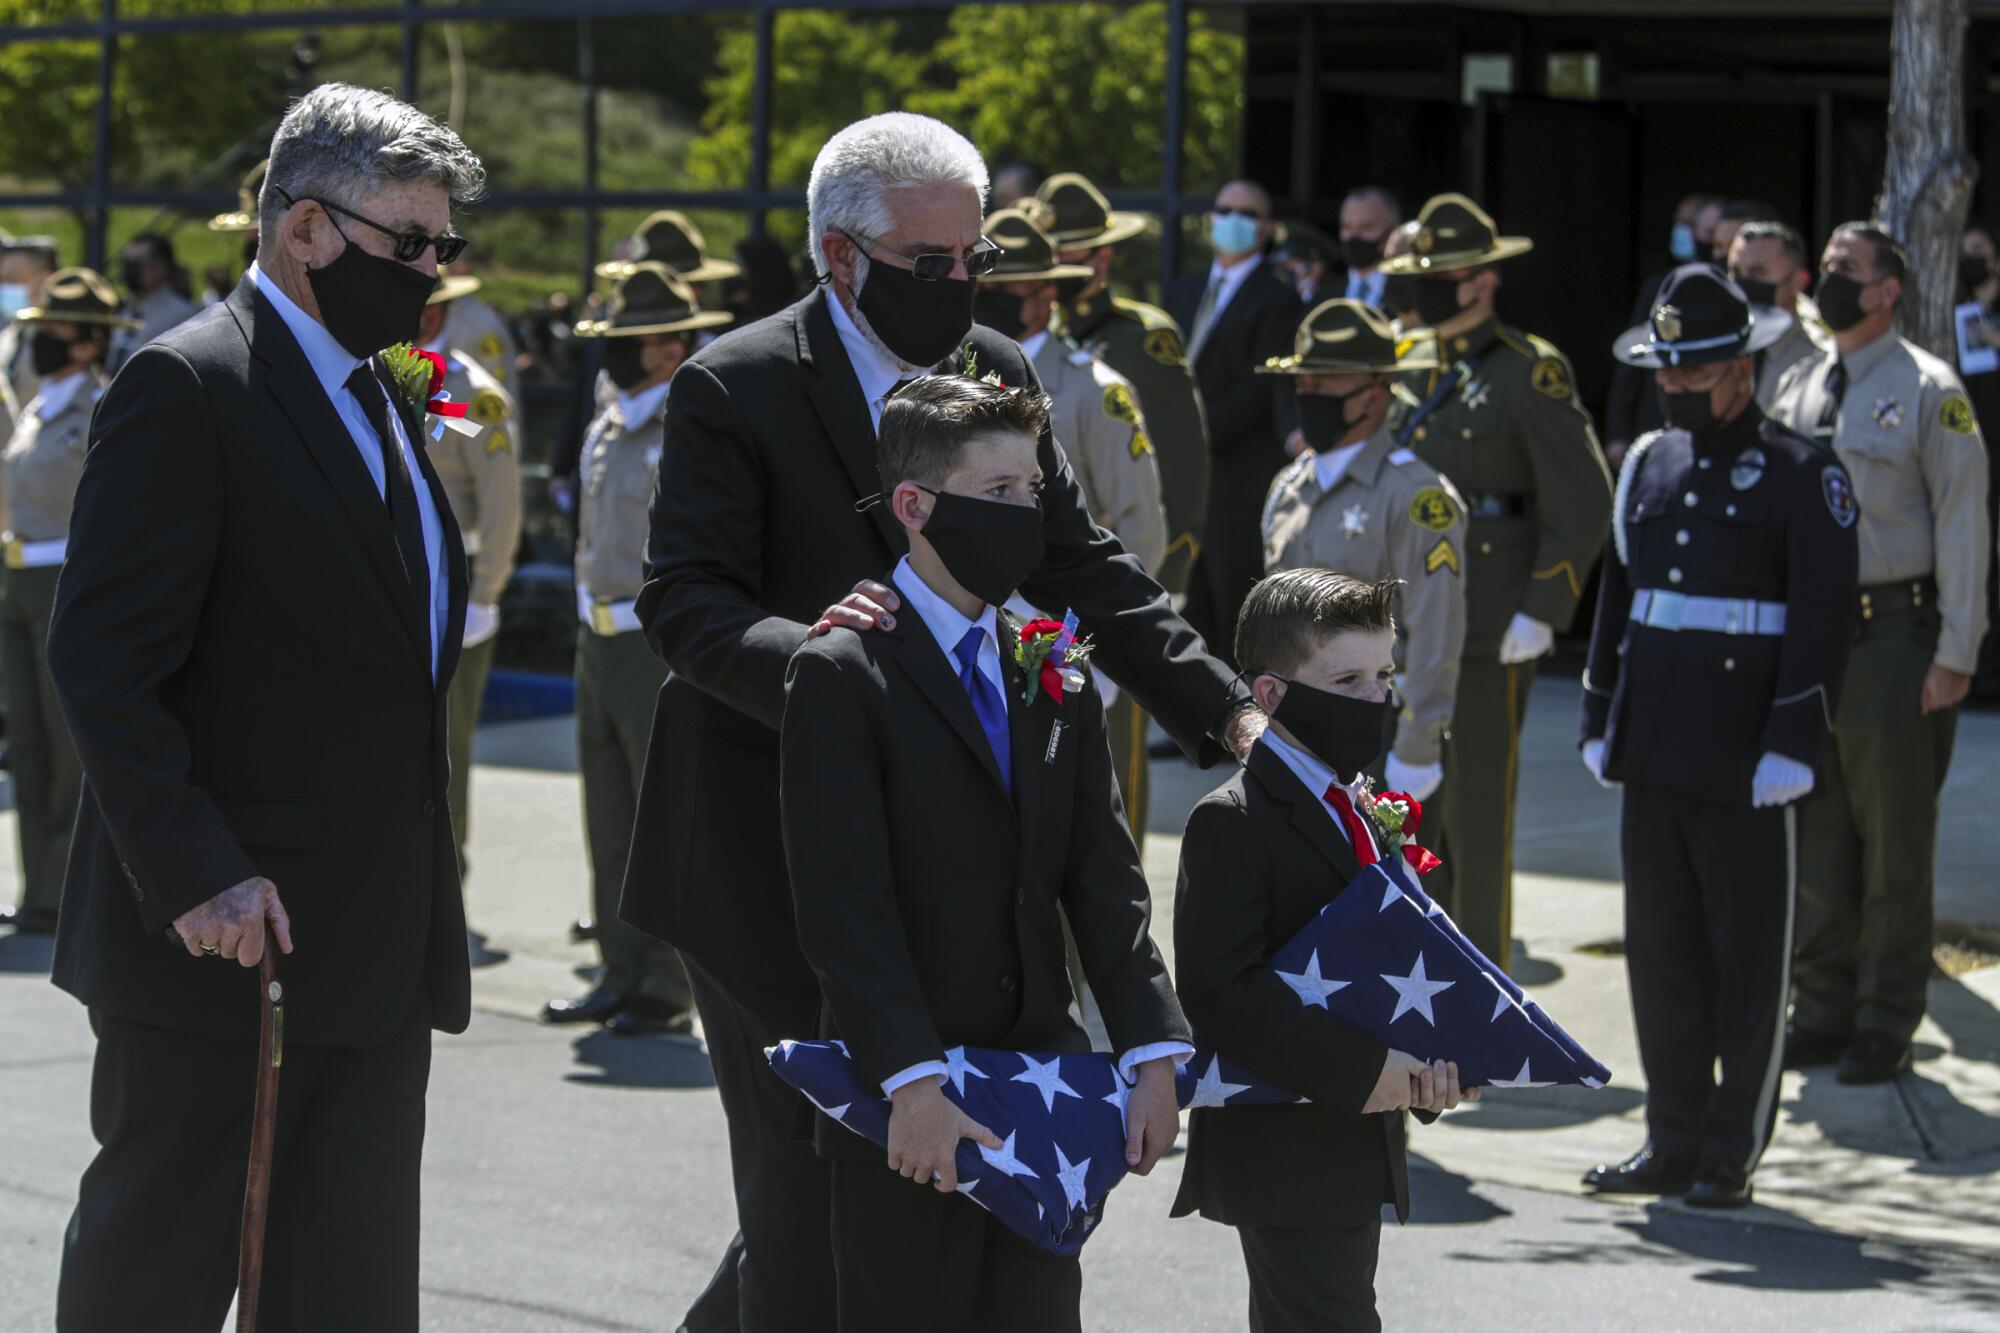 Two boys in suits and masks walk while carrying folded American flags.